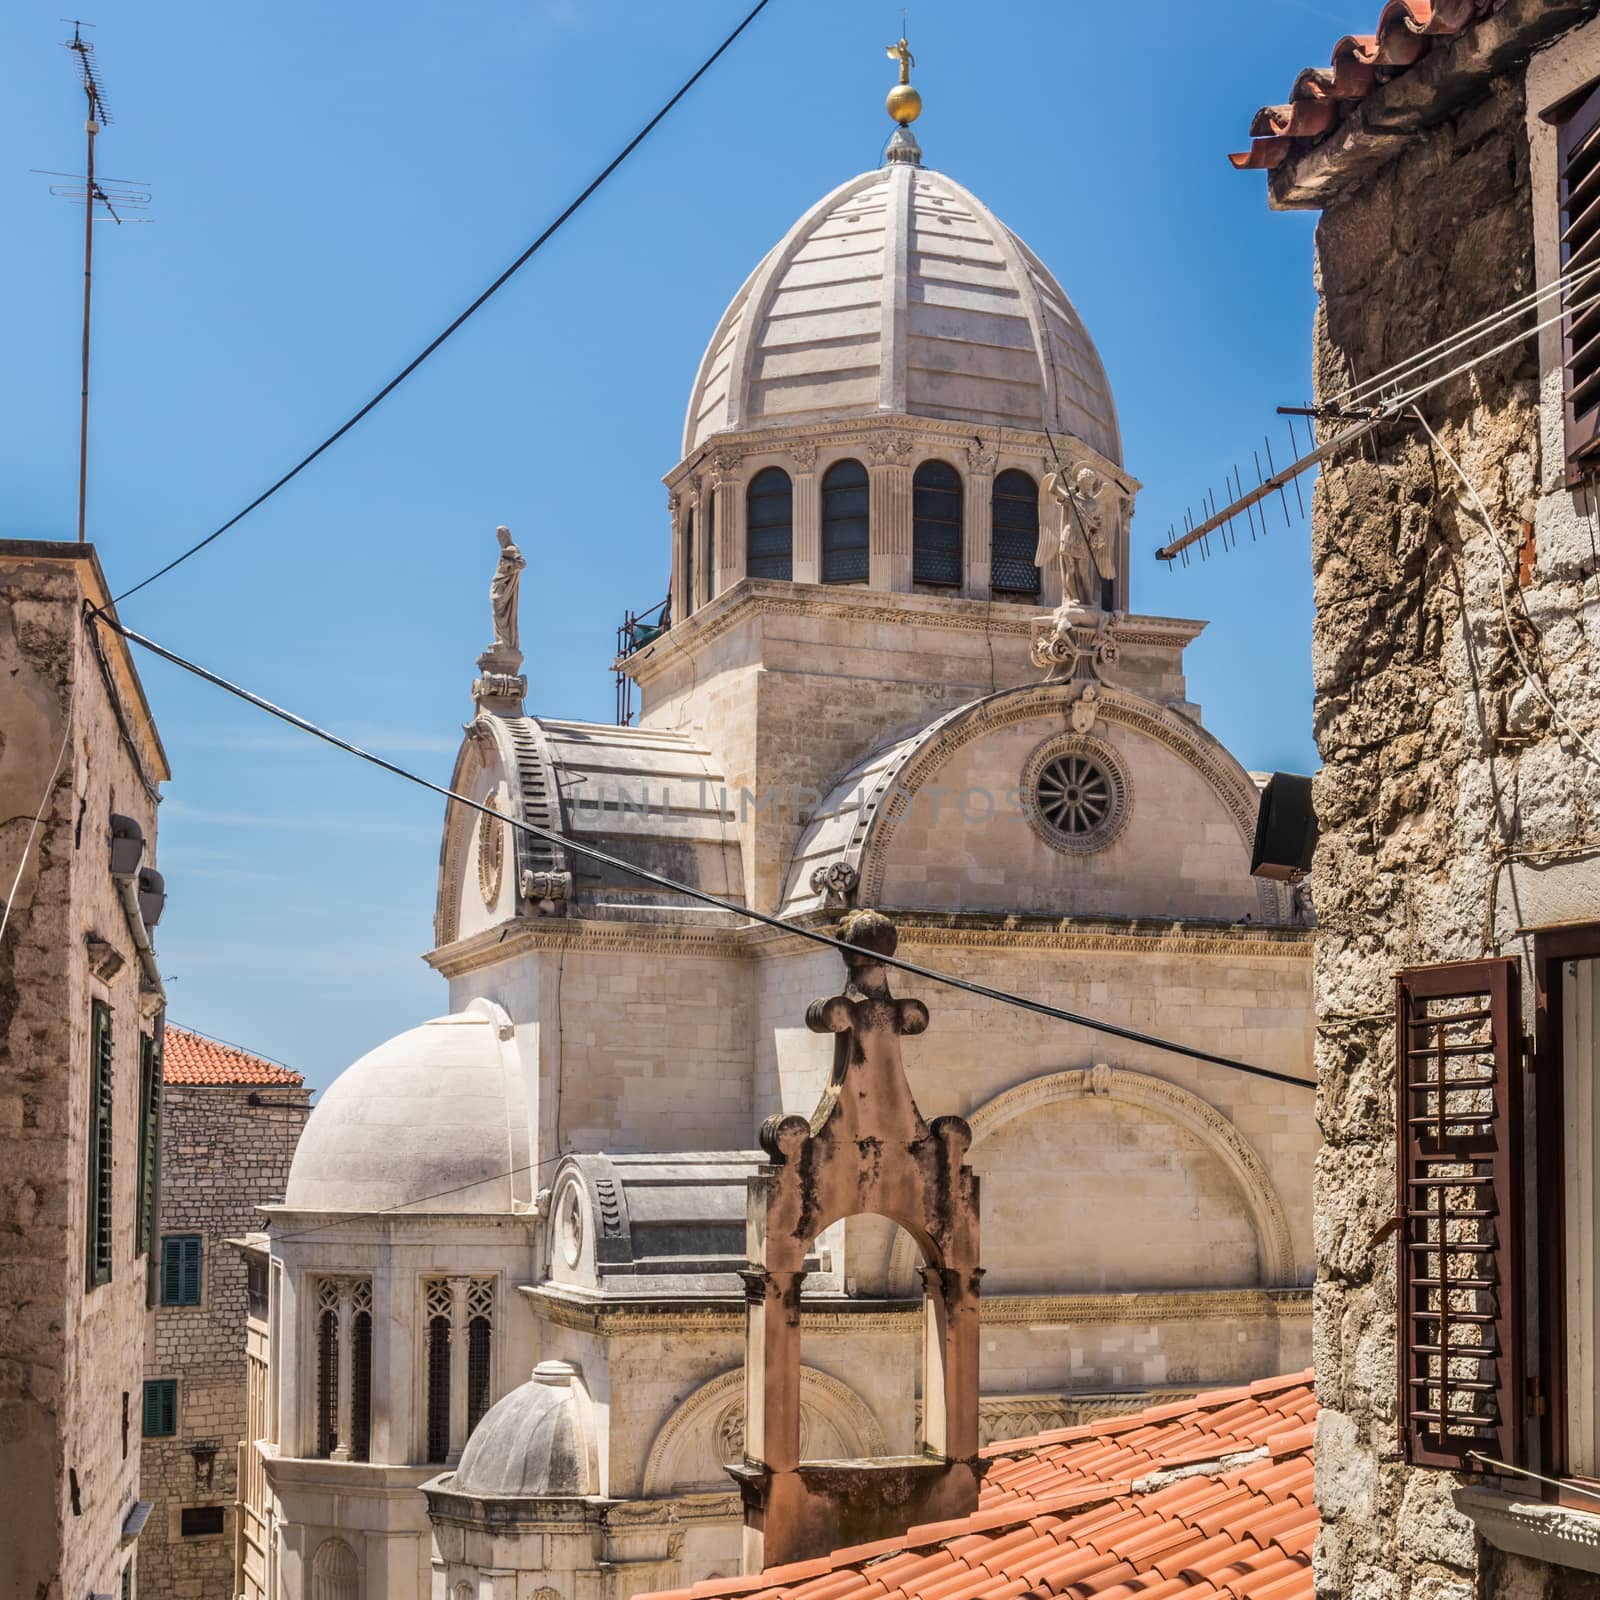 Croatia, city of Sibenik, panoramic view of the old town center and cathedral of St James, most important architectural monument of the Renaissance era in Croatia, UNESCO World Heritage.